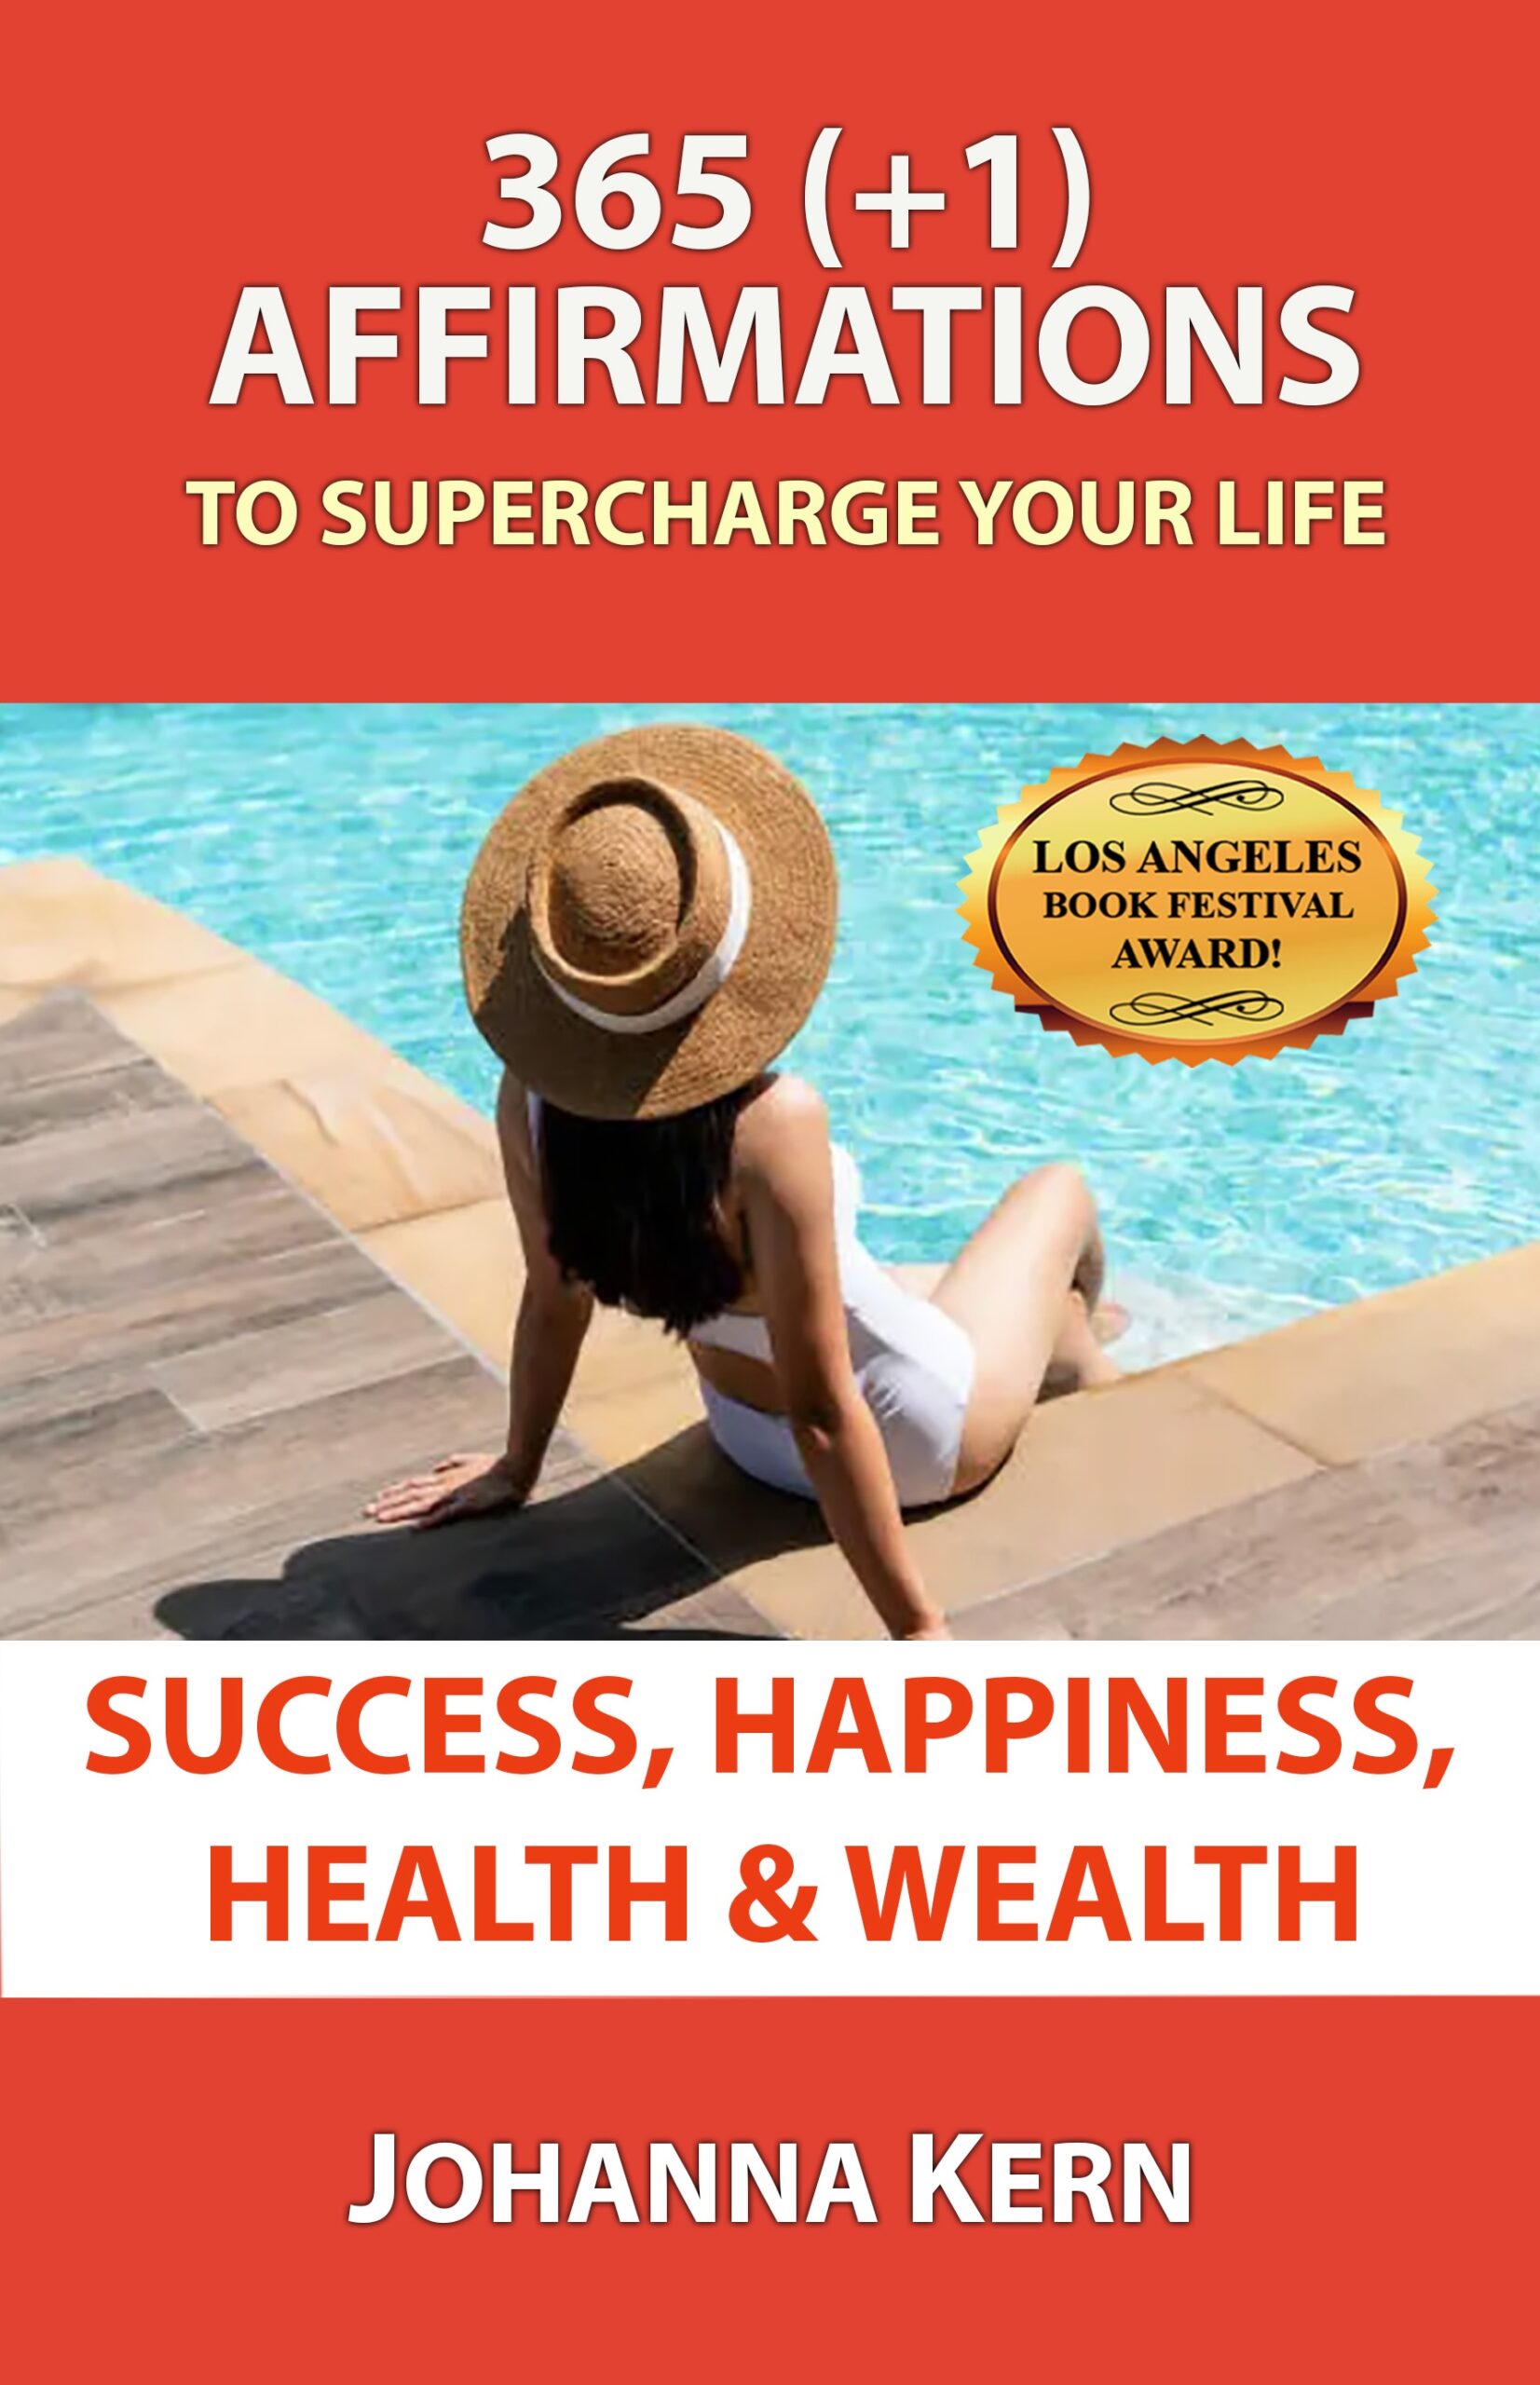 365 (+1) Affirmations to Supercharge Your Life